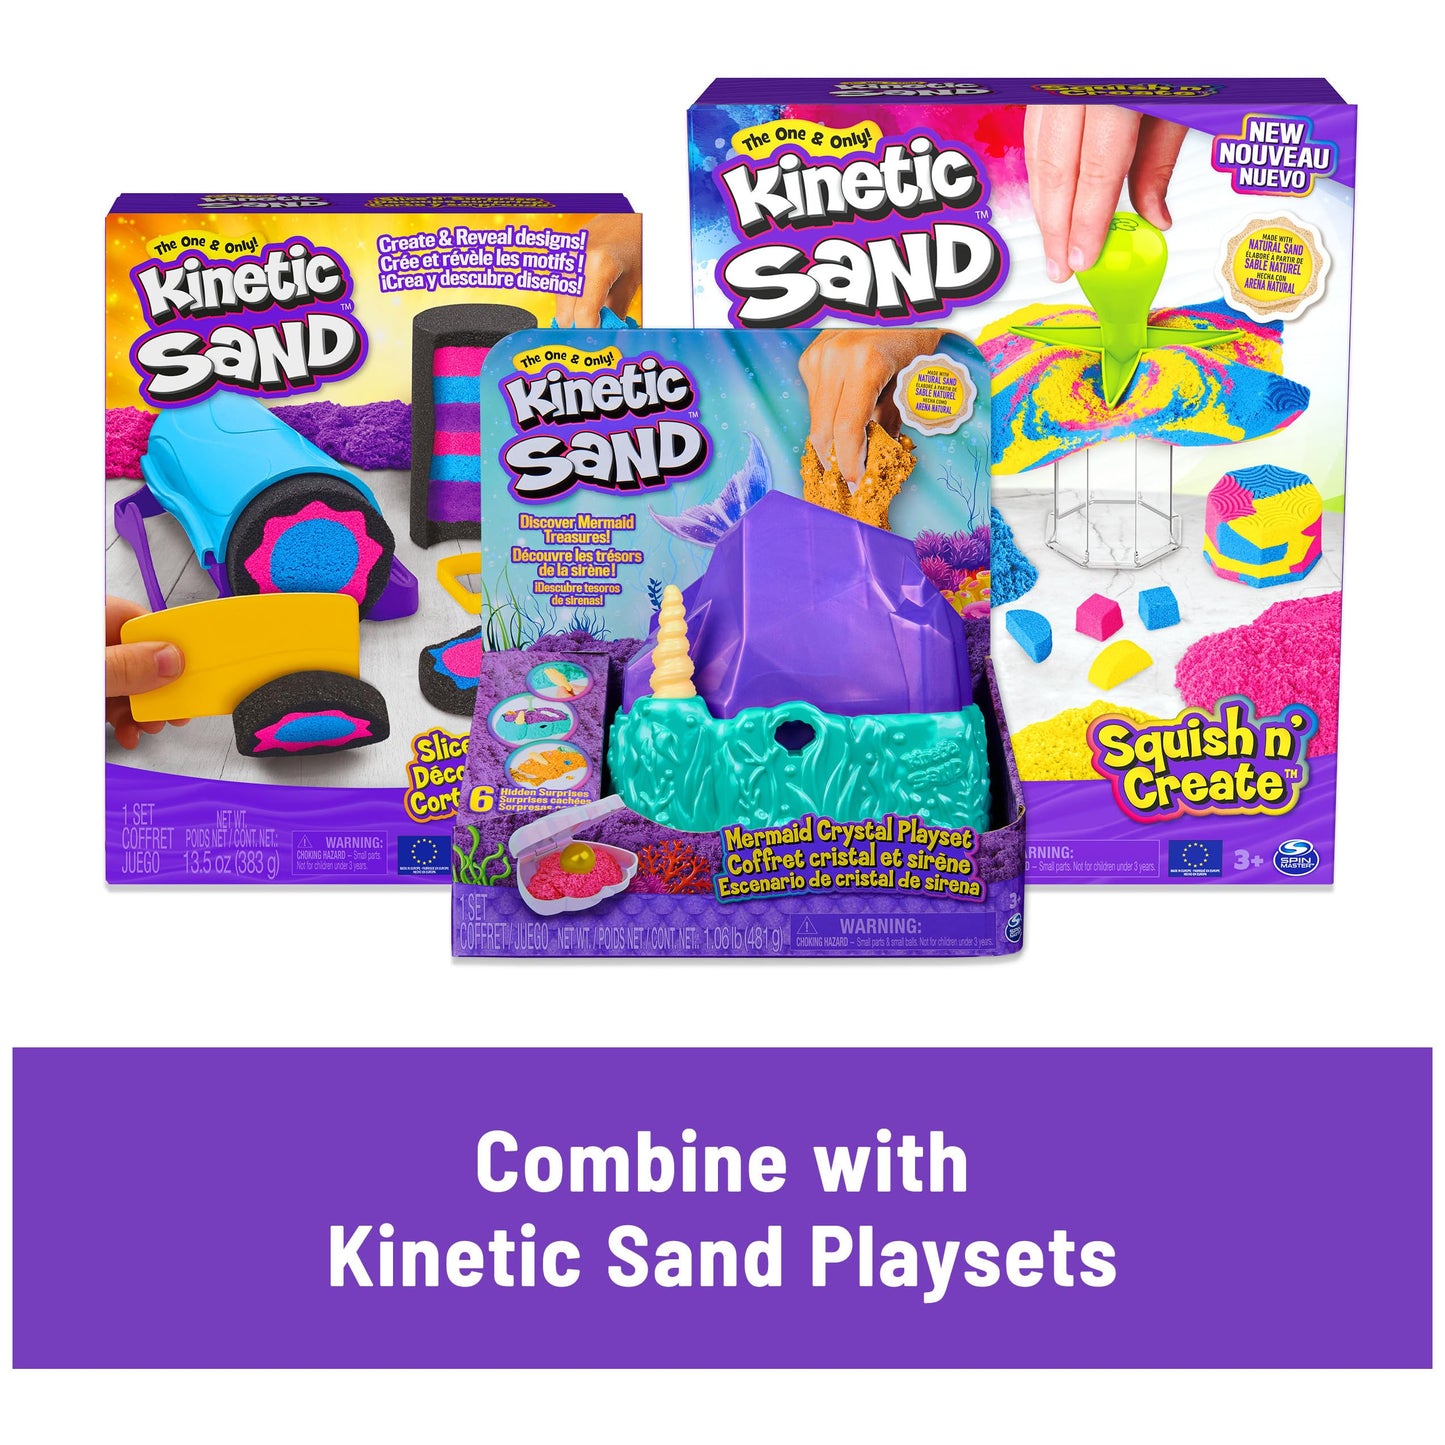 Kinetic Sand, The Original Moldable Play Sand, 3.25lbs Beach Sand, Sensory Toys, Holiday & Christmas Gifts for Kids Ages 3+ (Amazon Exclusive)